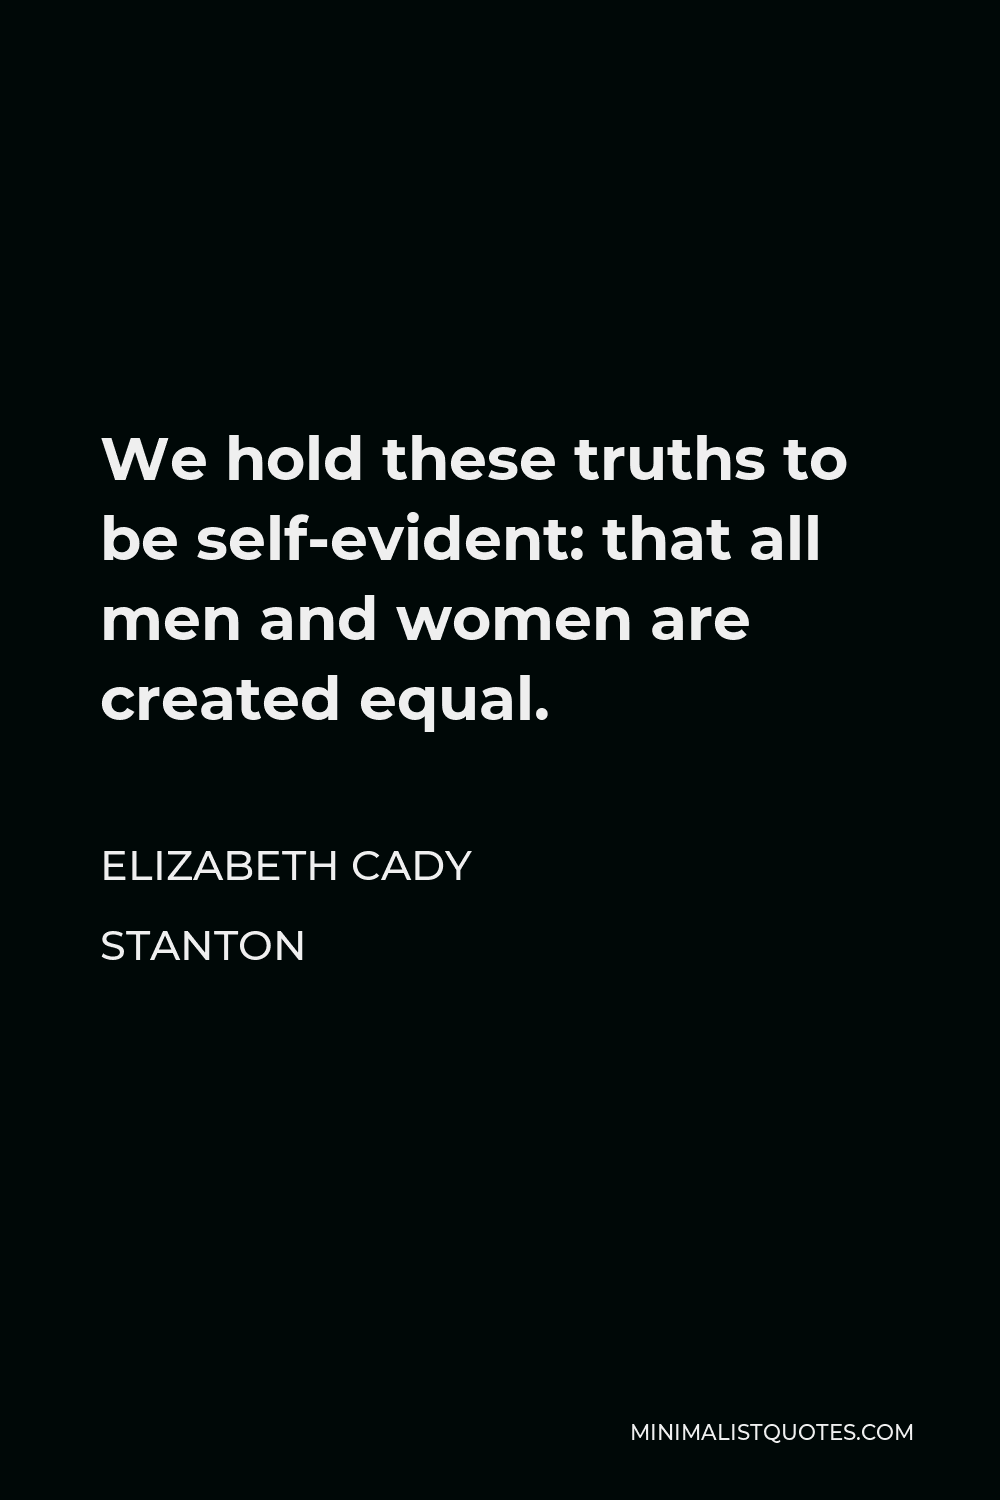 Elizabeth Cady Stanton Quote - We hold these truths to be self-evident: that all men and women are created equal.